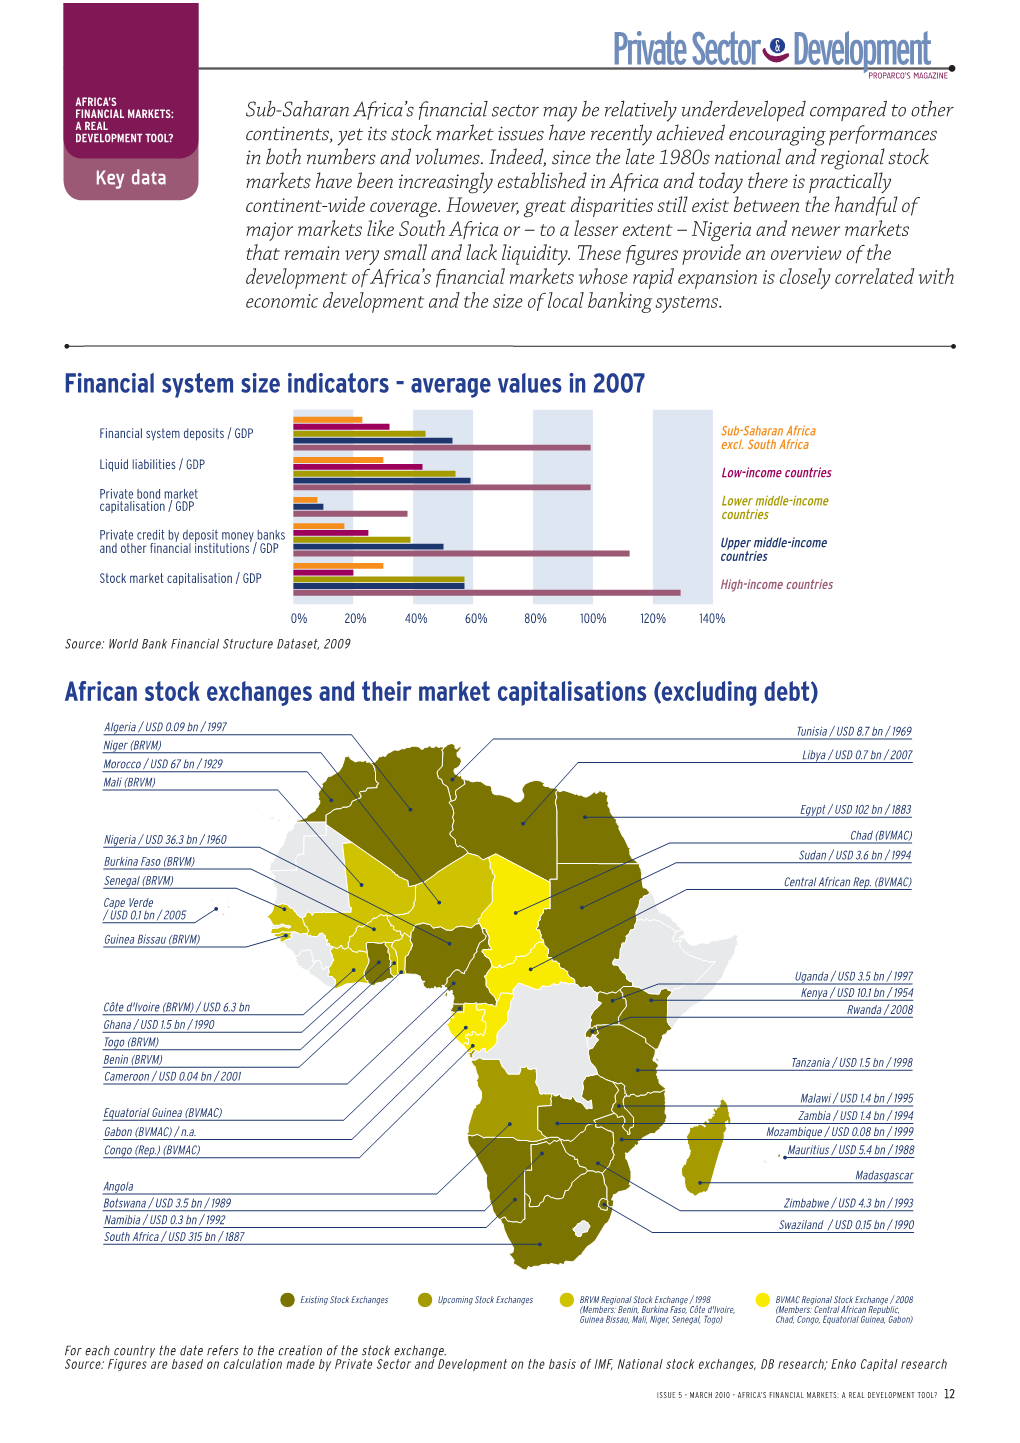 Average Values in 2007 African Stock Exchanges and Their Market